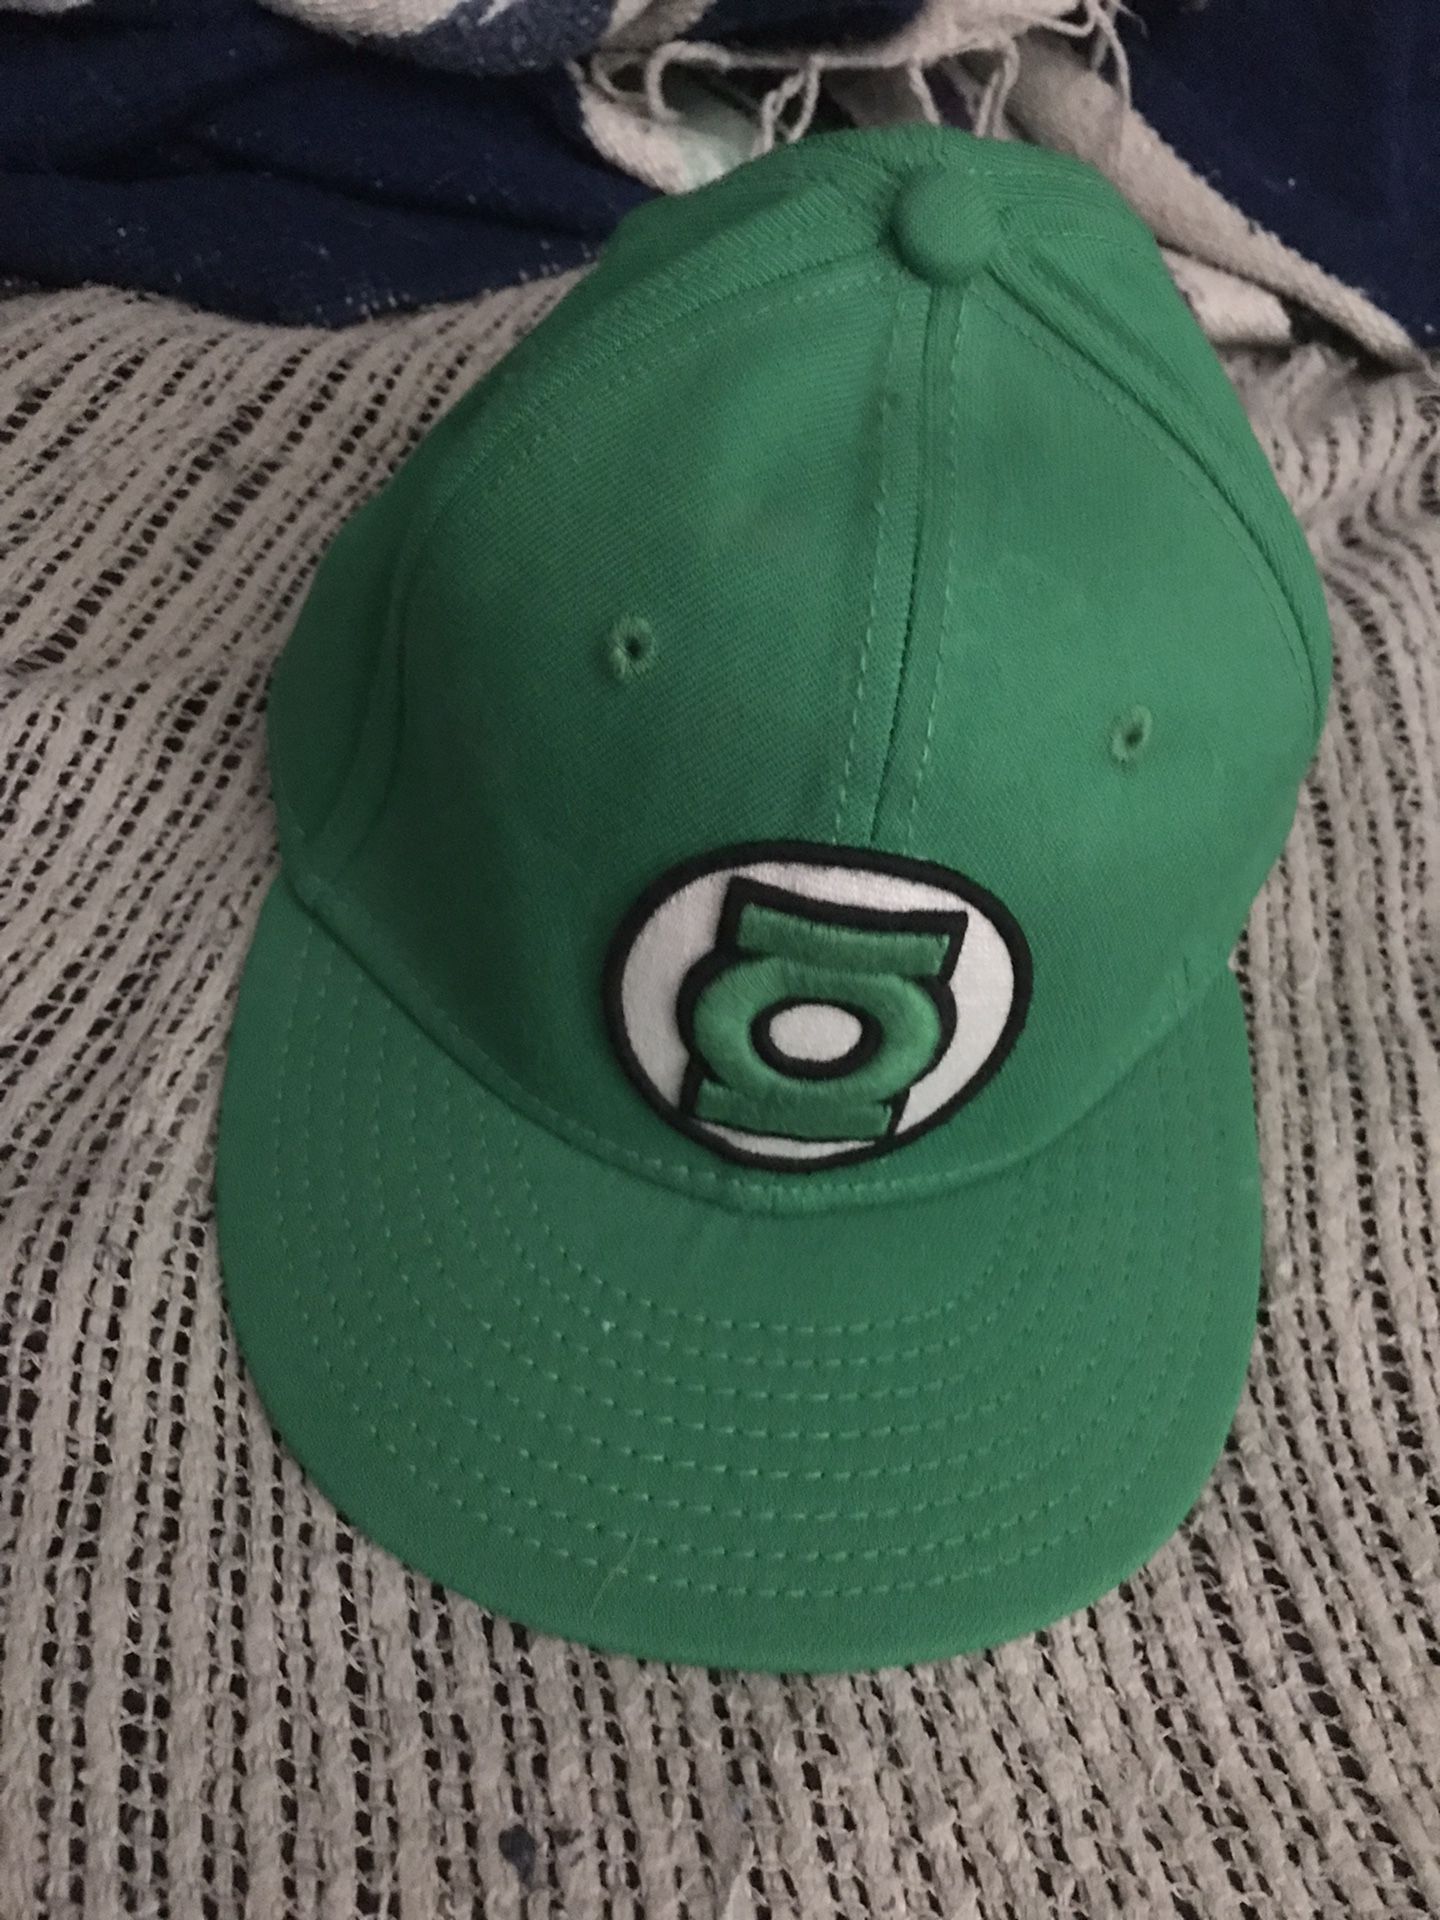 New A Flex In Bordered Dc Comics Collection Green Lantern Baseball Cap Very Nice Only $20 Firm